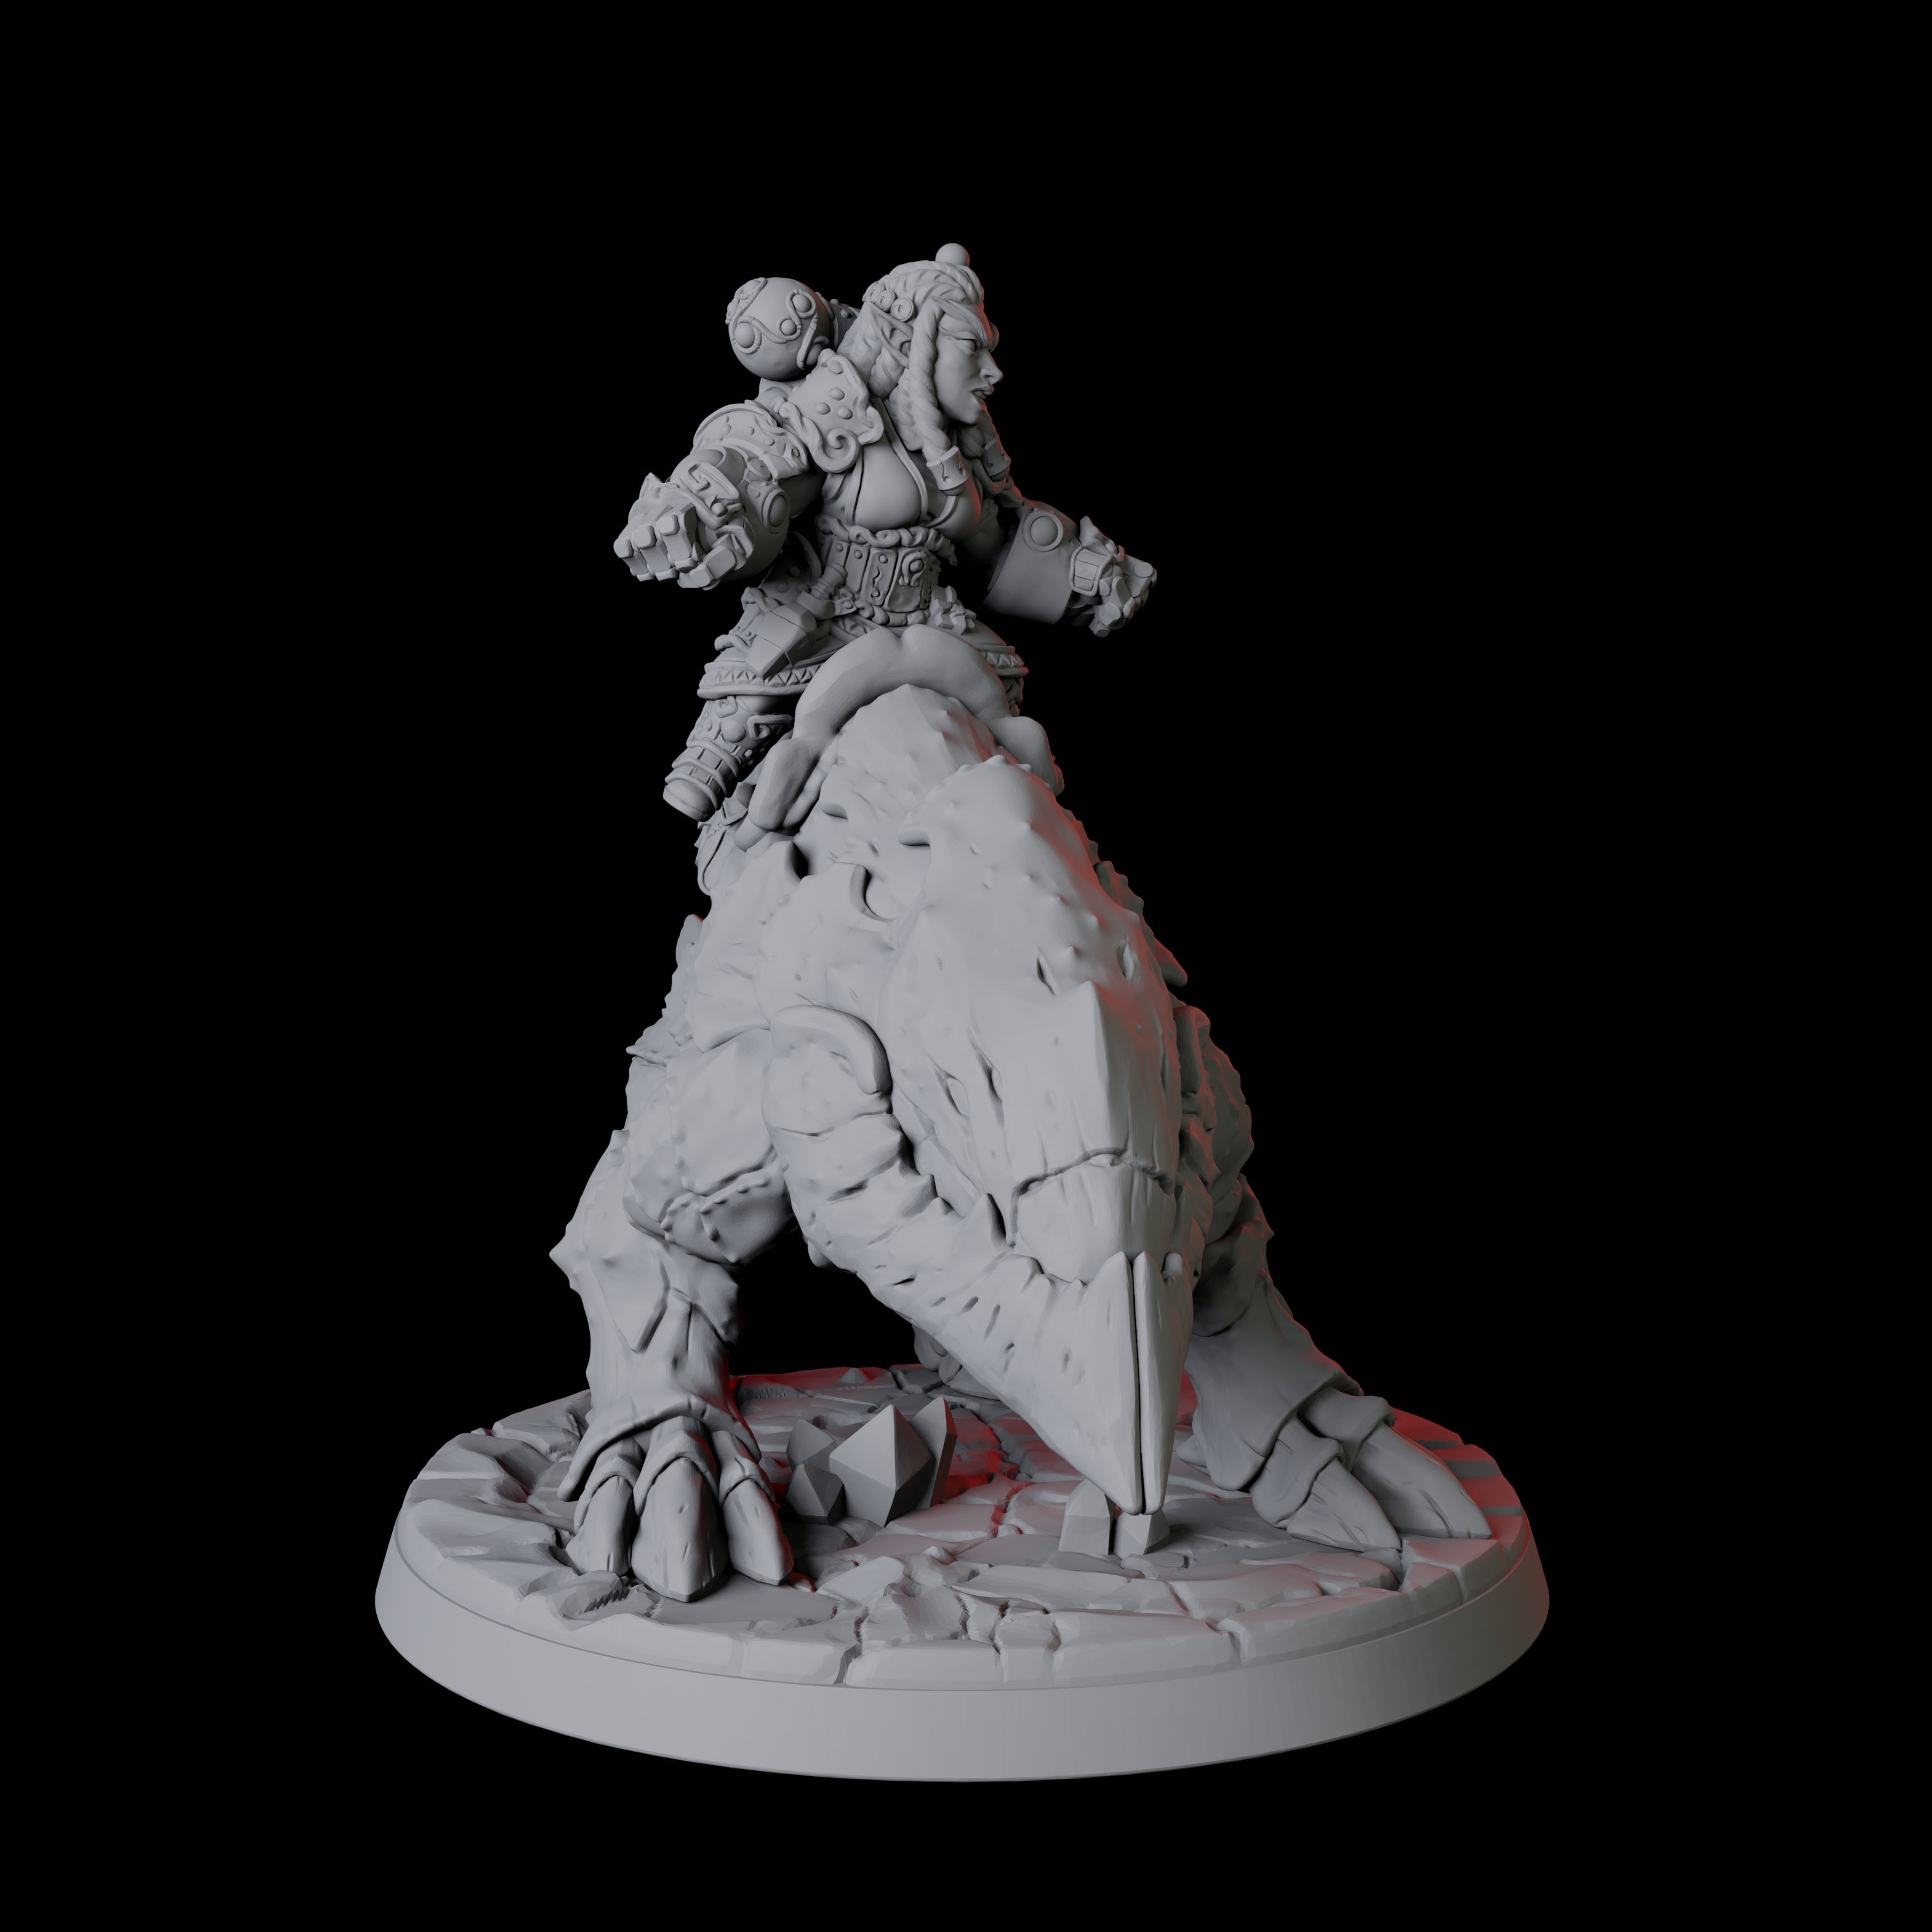 Gnome Rider D Miniature for Dungeons and Dragons, Pathfinder or other TTRPGs